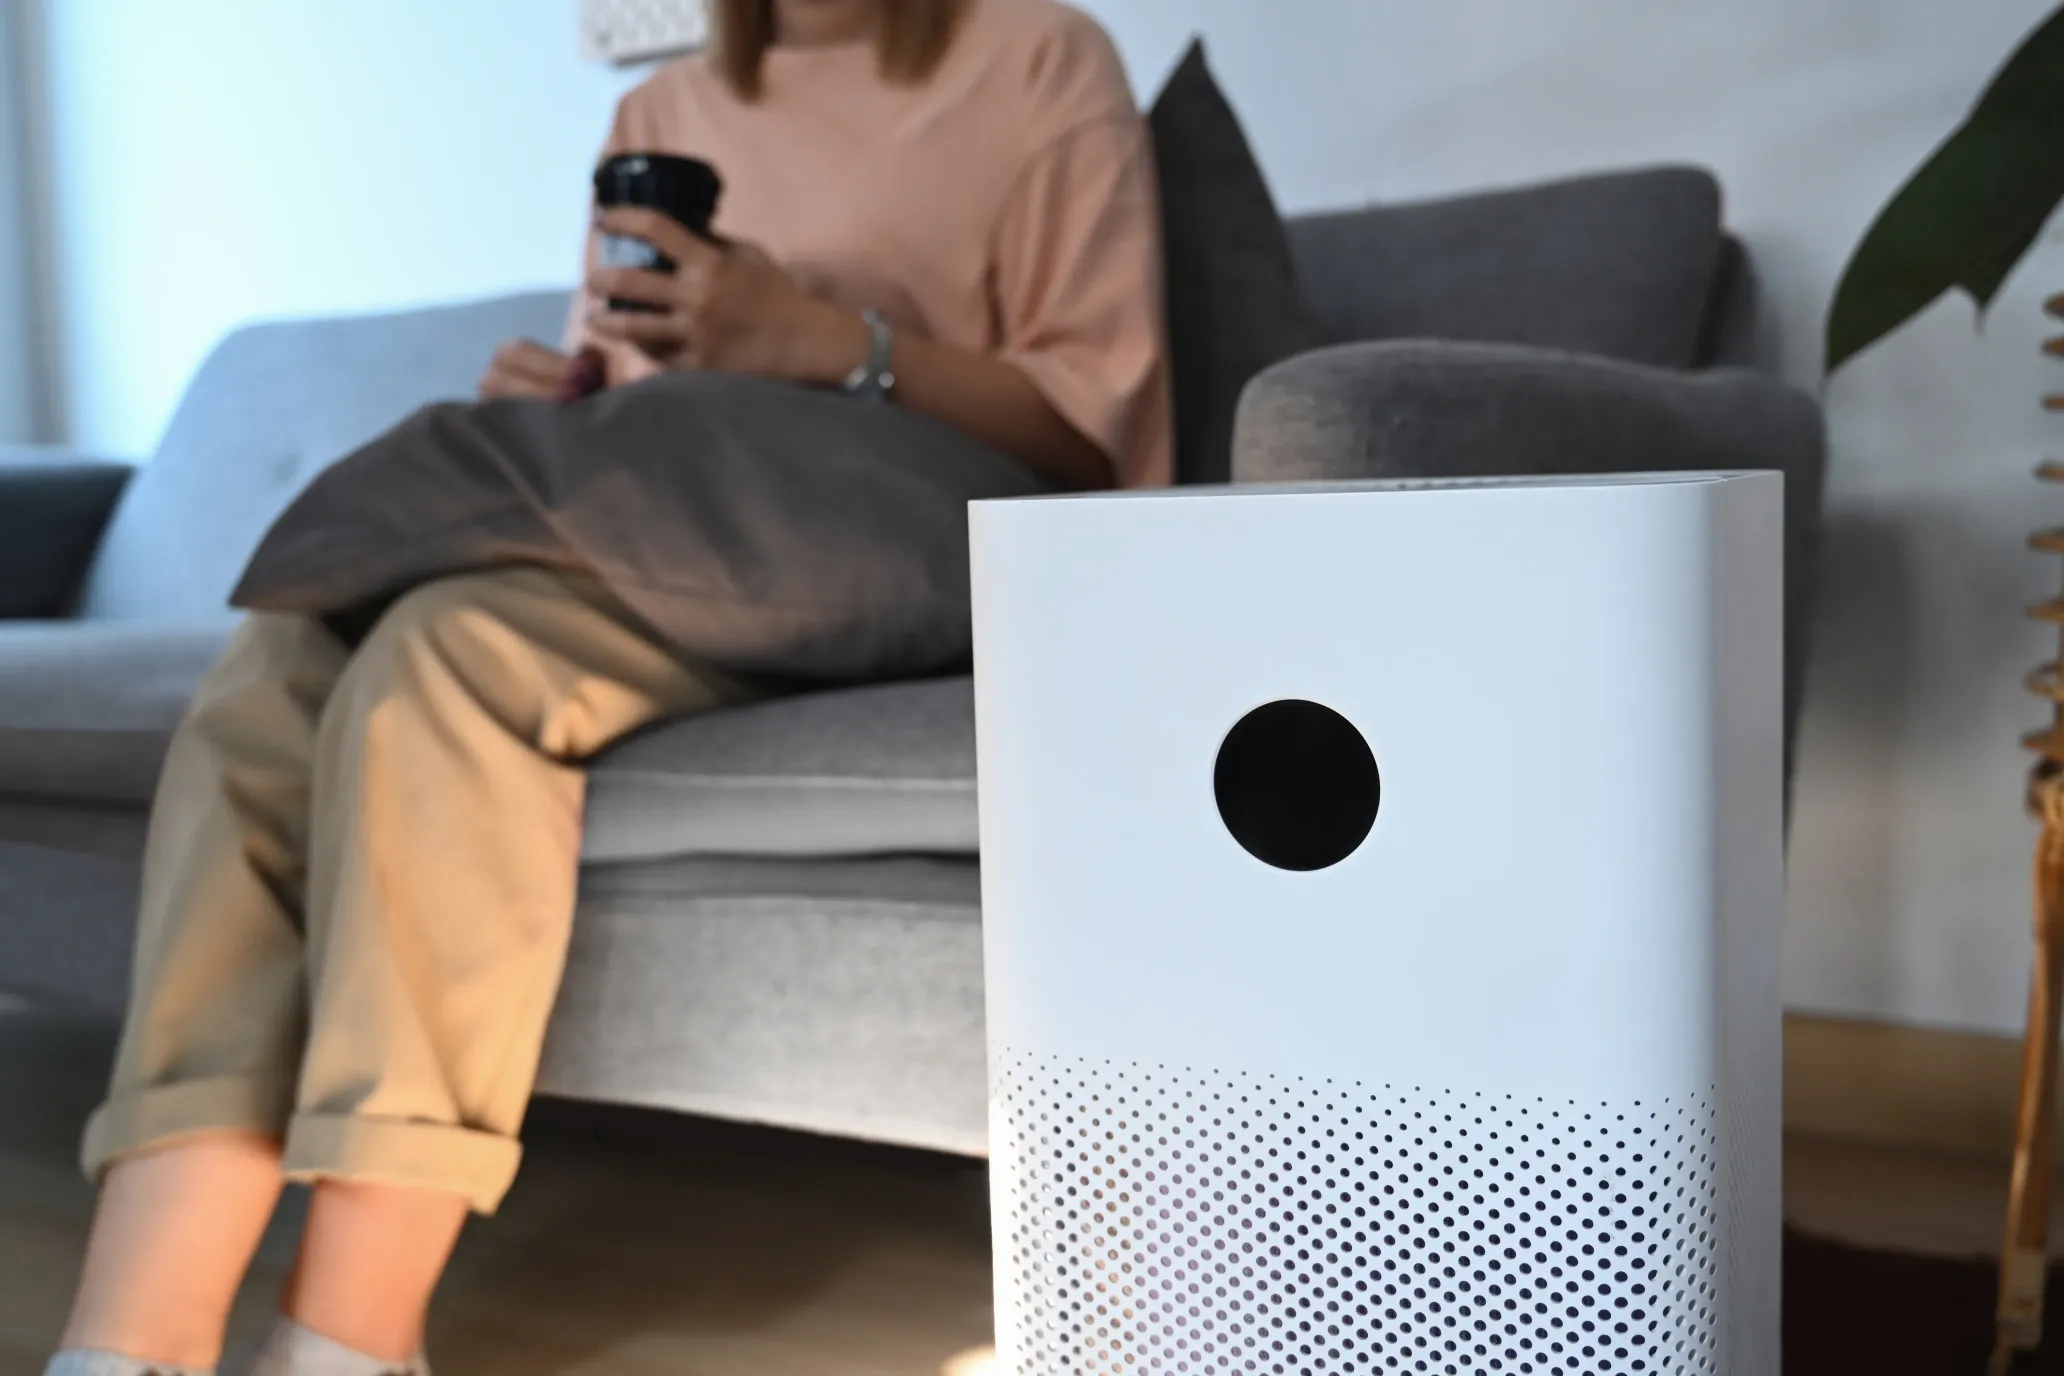 Air purifier in a well-lit living room effectively filtering and cleaning the air, removing dust particles and PM2.5 pollutants